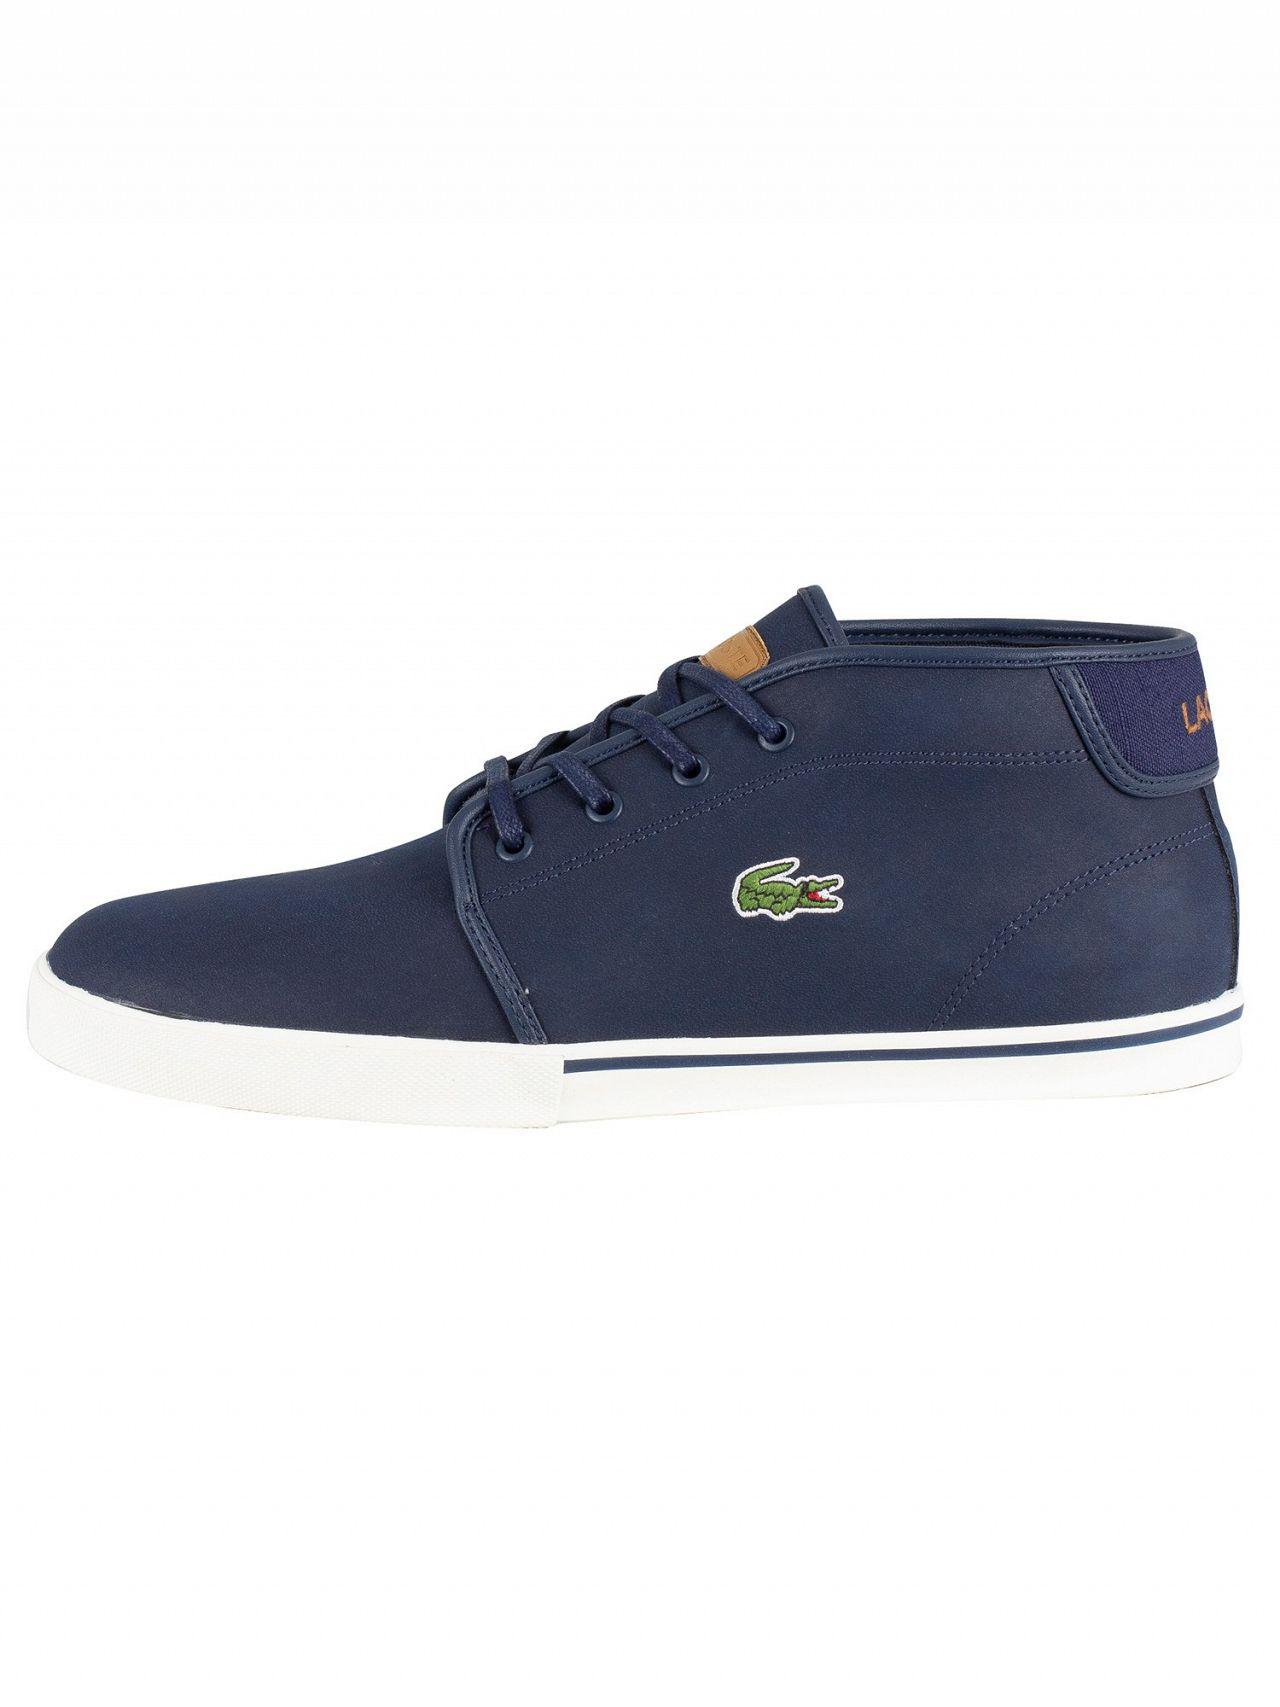 lacoste ampthill 119